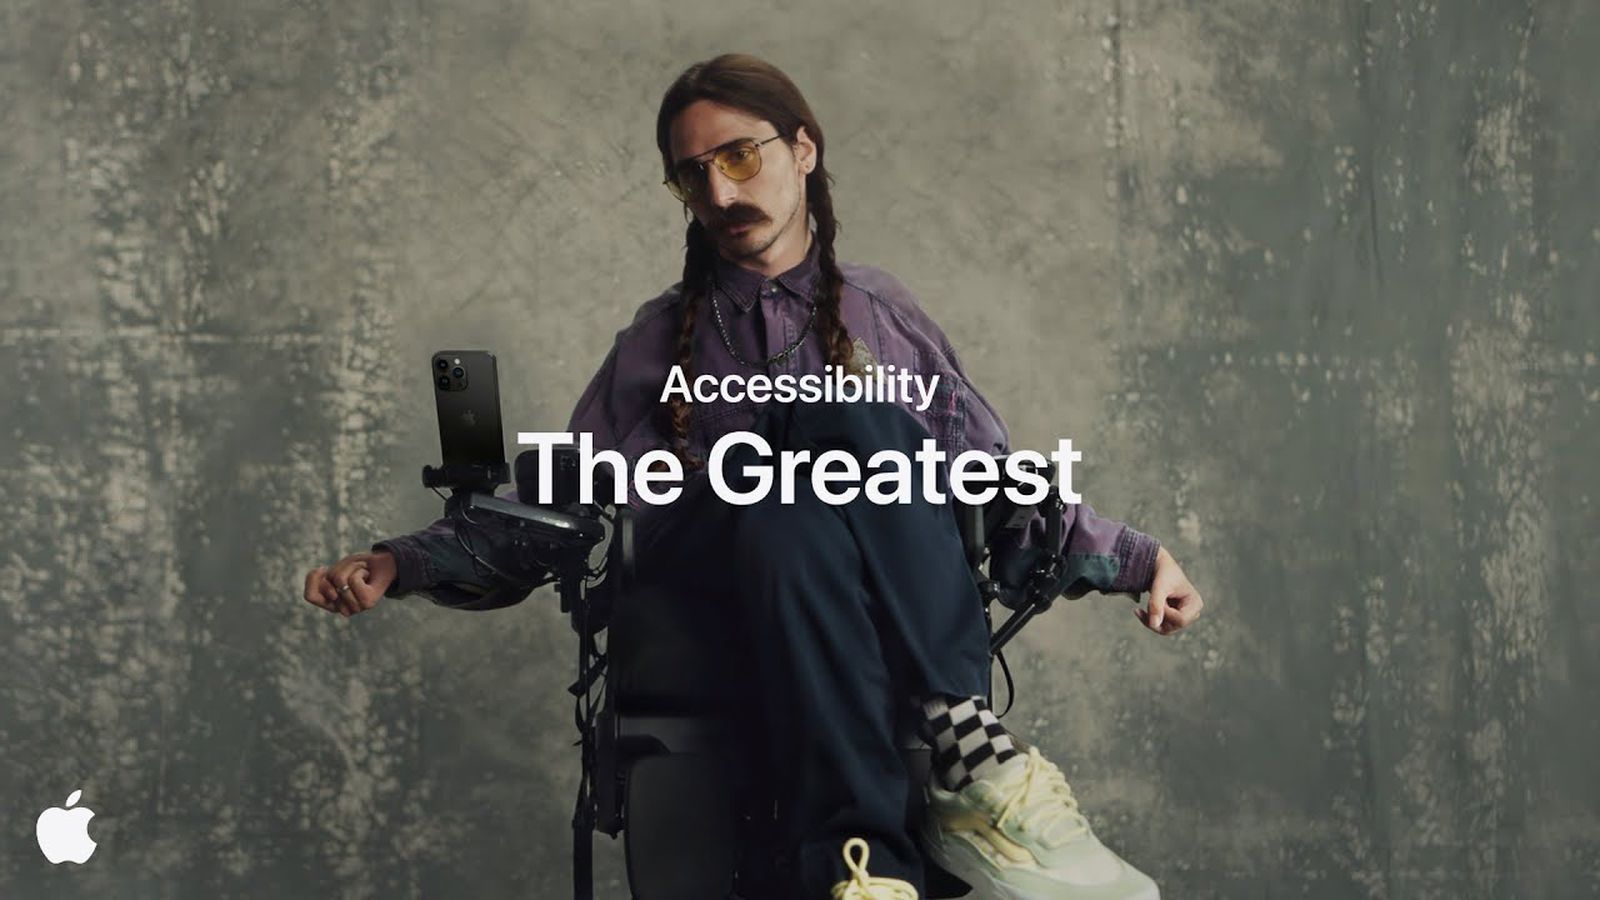 Apple Highlights Accessibility Features on iPhone, Mac, and More in New Ad